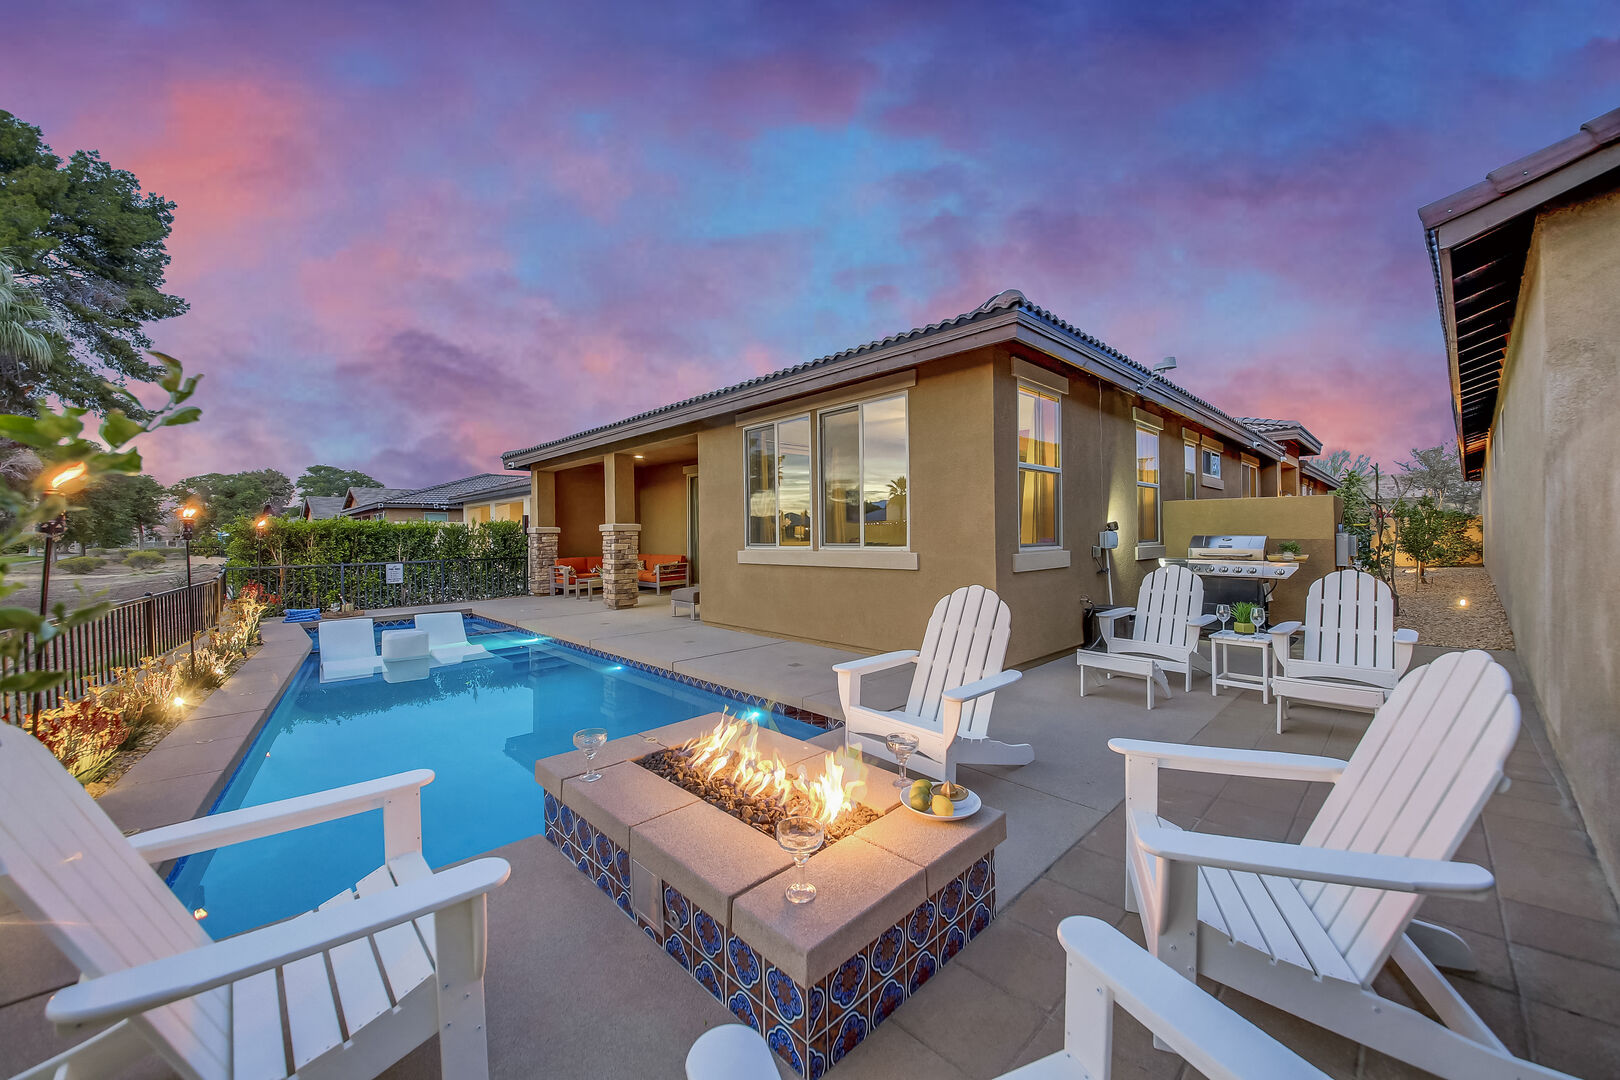 Take a walk around the gorgeous community and finish your nights watching the sunset behind the Santa Rosa Mountain Range.